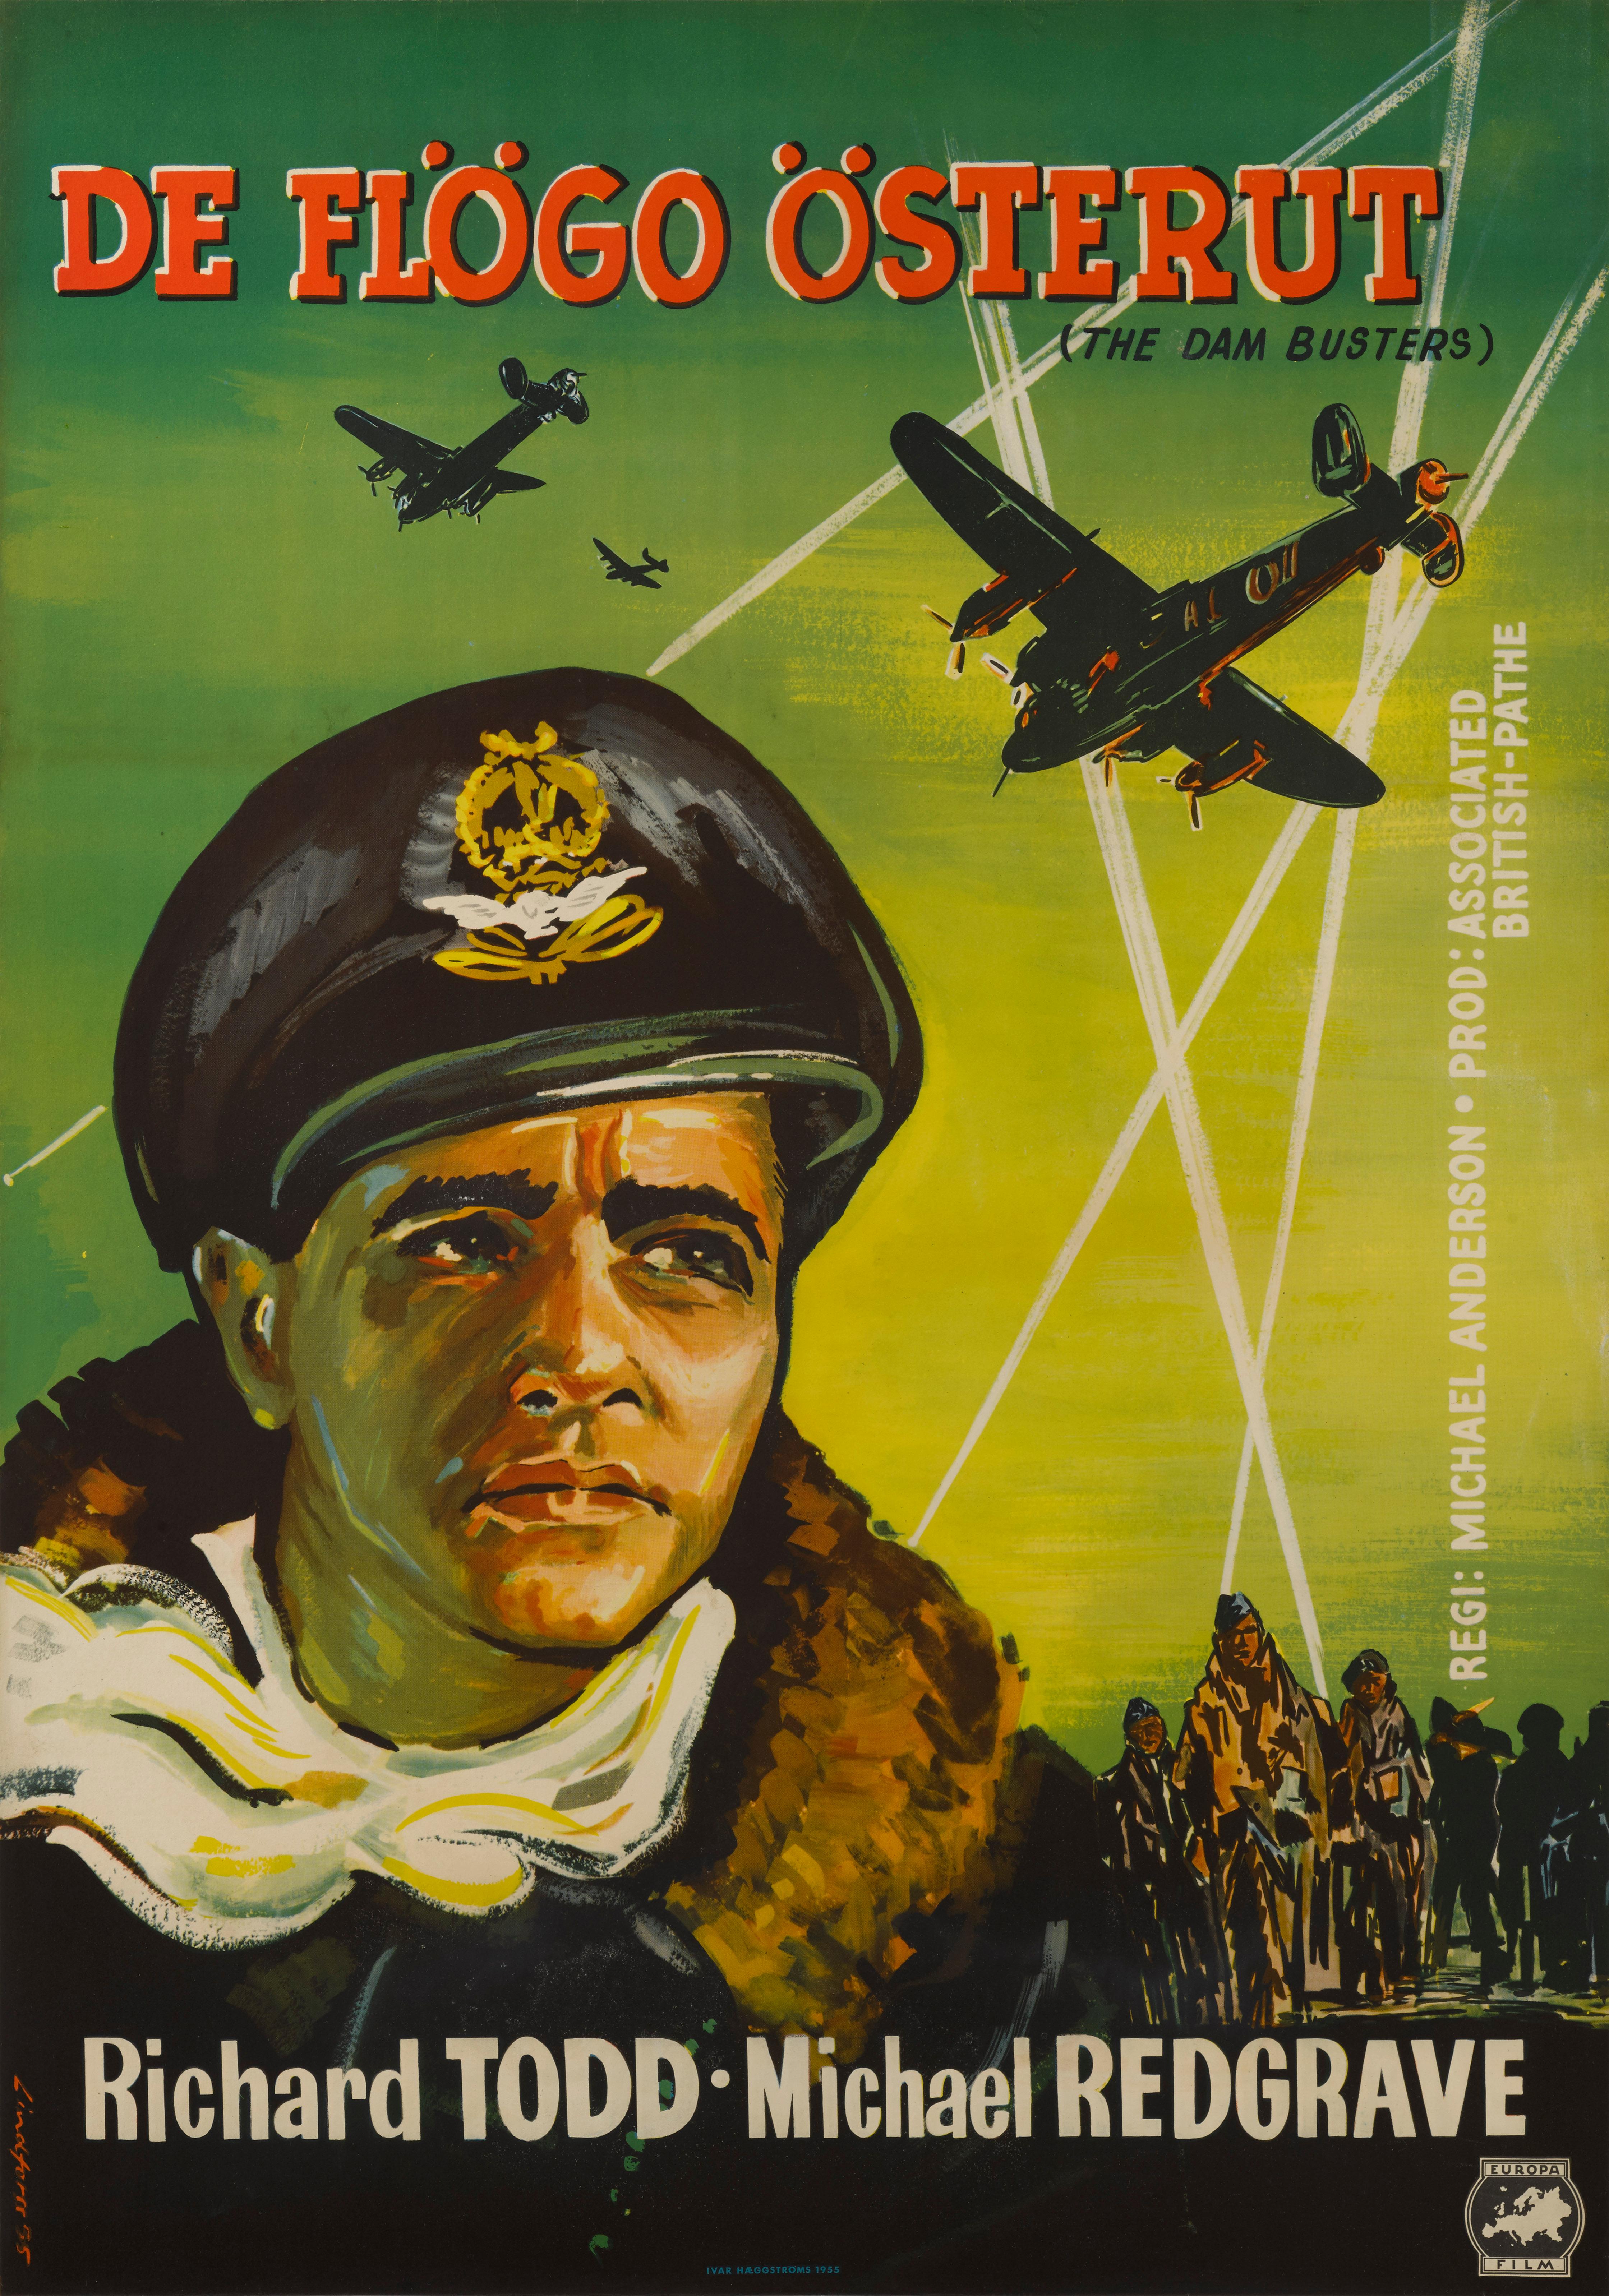 Original Swedish film poster for The Dam Busters 1955. This British epic war film was directed by Michael Anderson, and stars Richard Todd and Michael Redgrave. It was based on two books, The Dam Busters by Paul Brickhill in 1951 and Enemy Coast